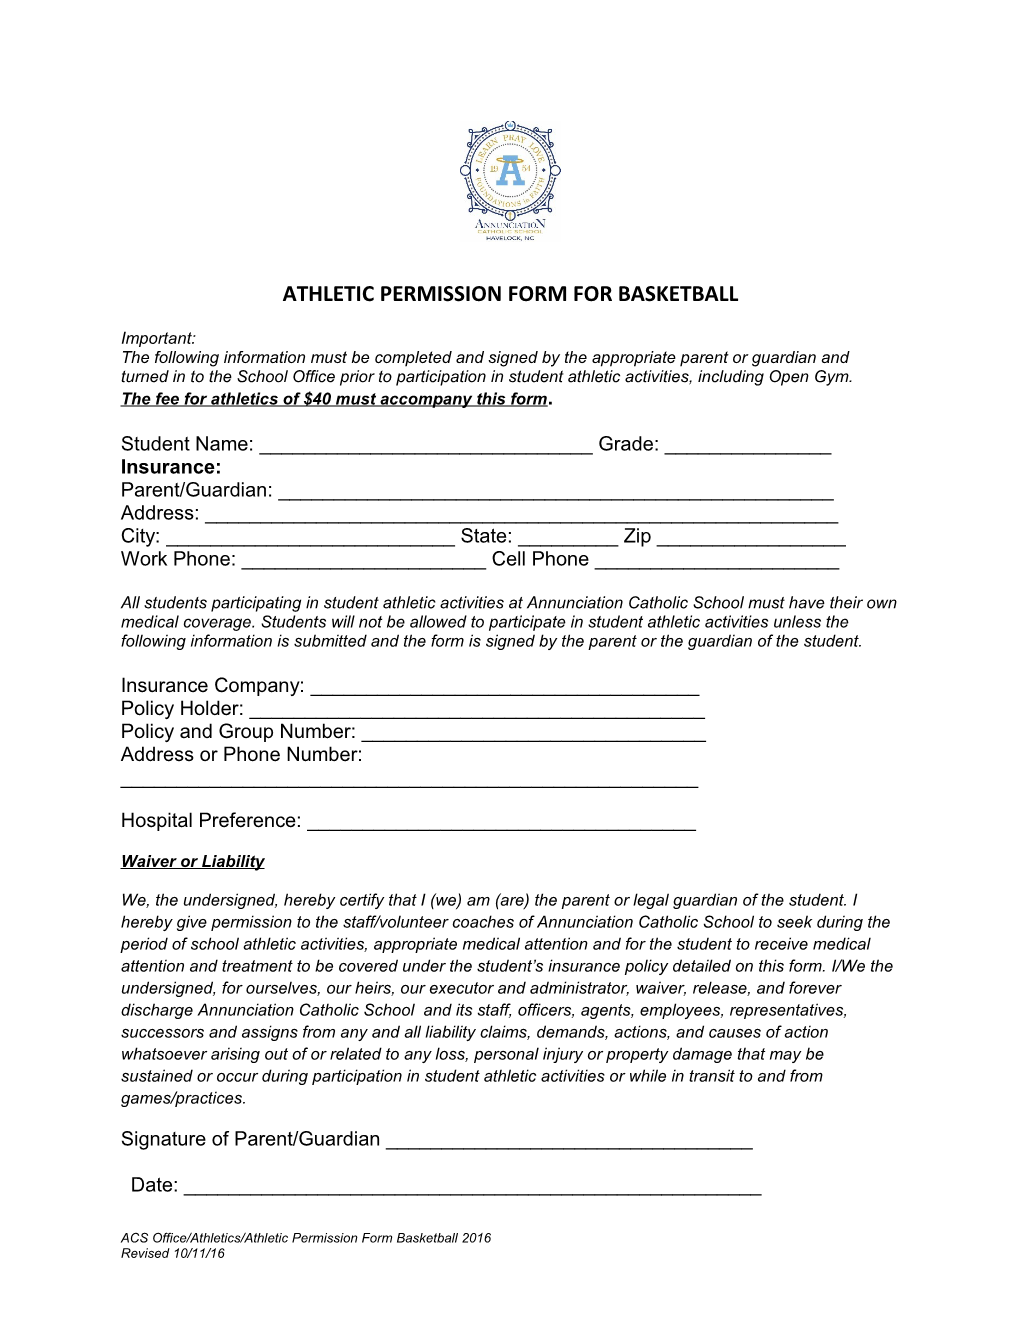 Athletic Permission Form for Basketball